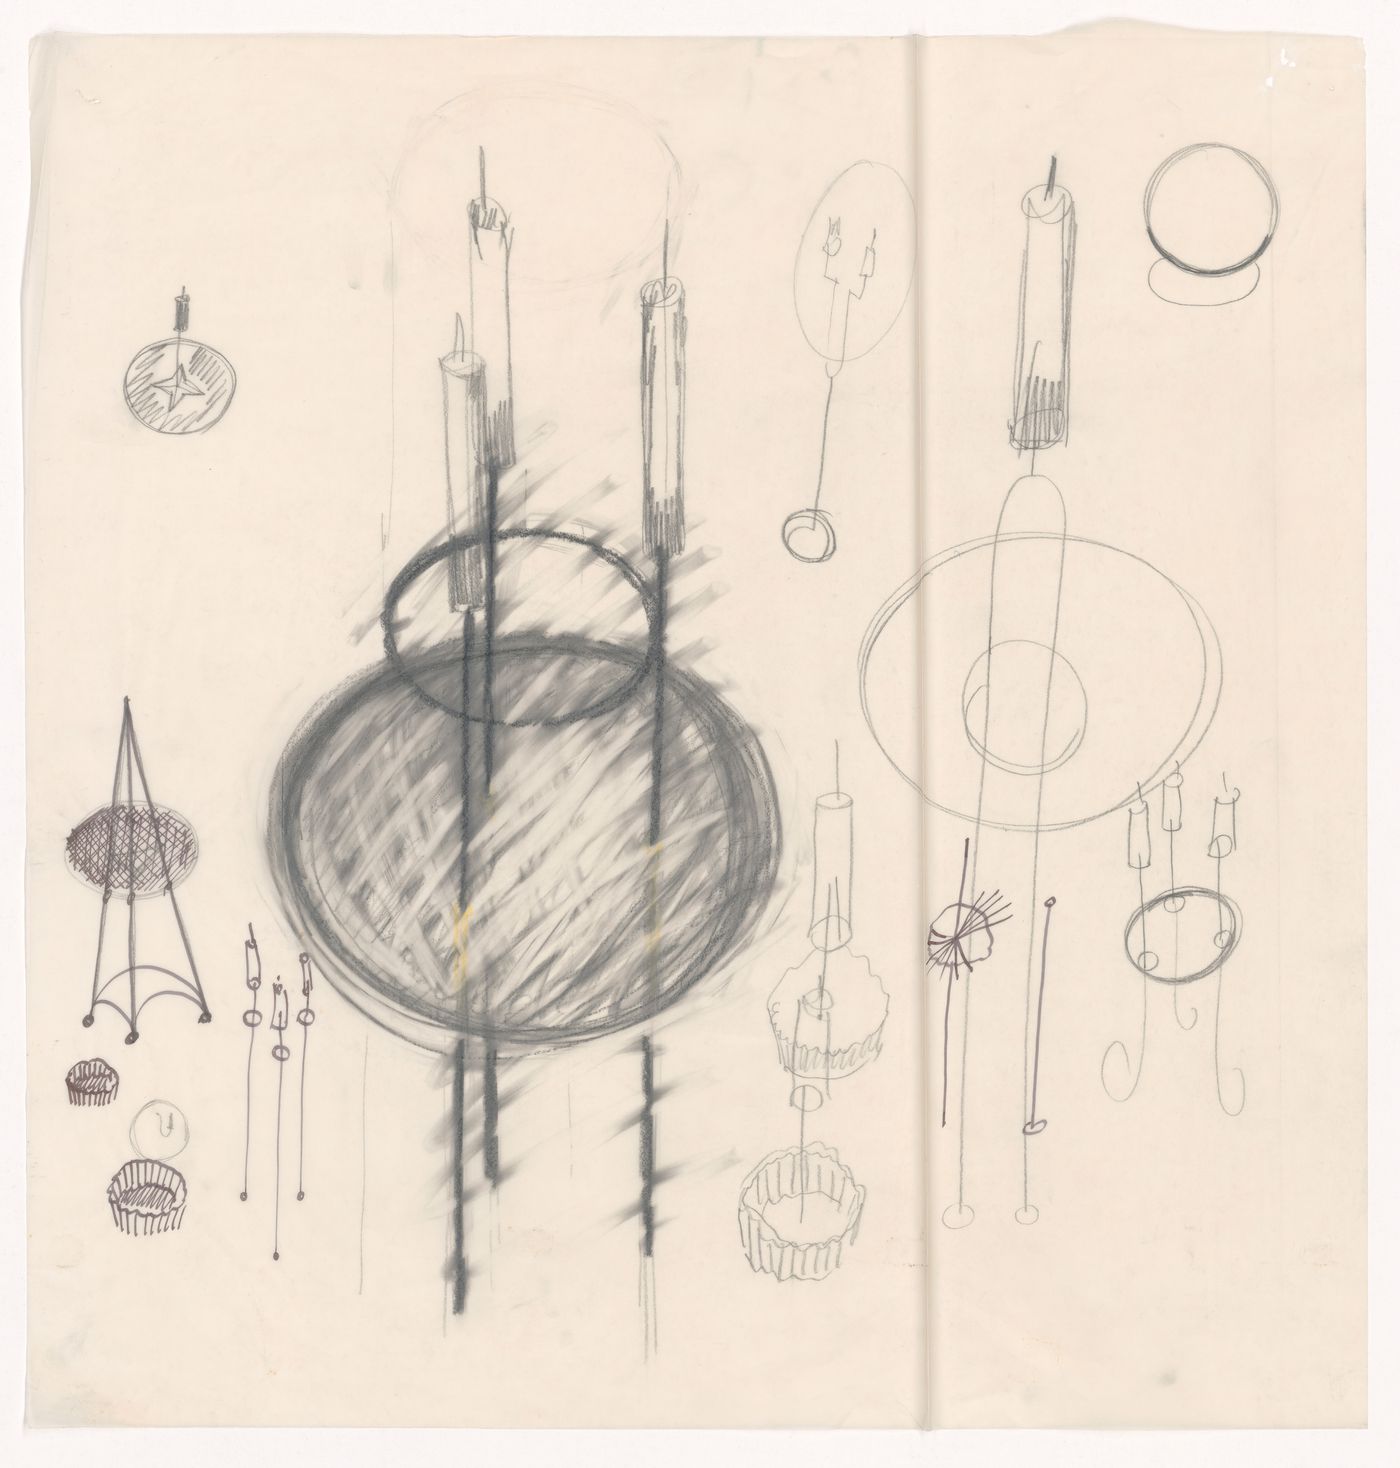 Multiple sketches (from the project-file "Sketches and drawings on various projects, including lamp designs, 1970s-1980s")